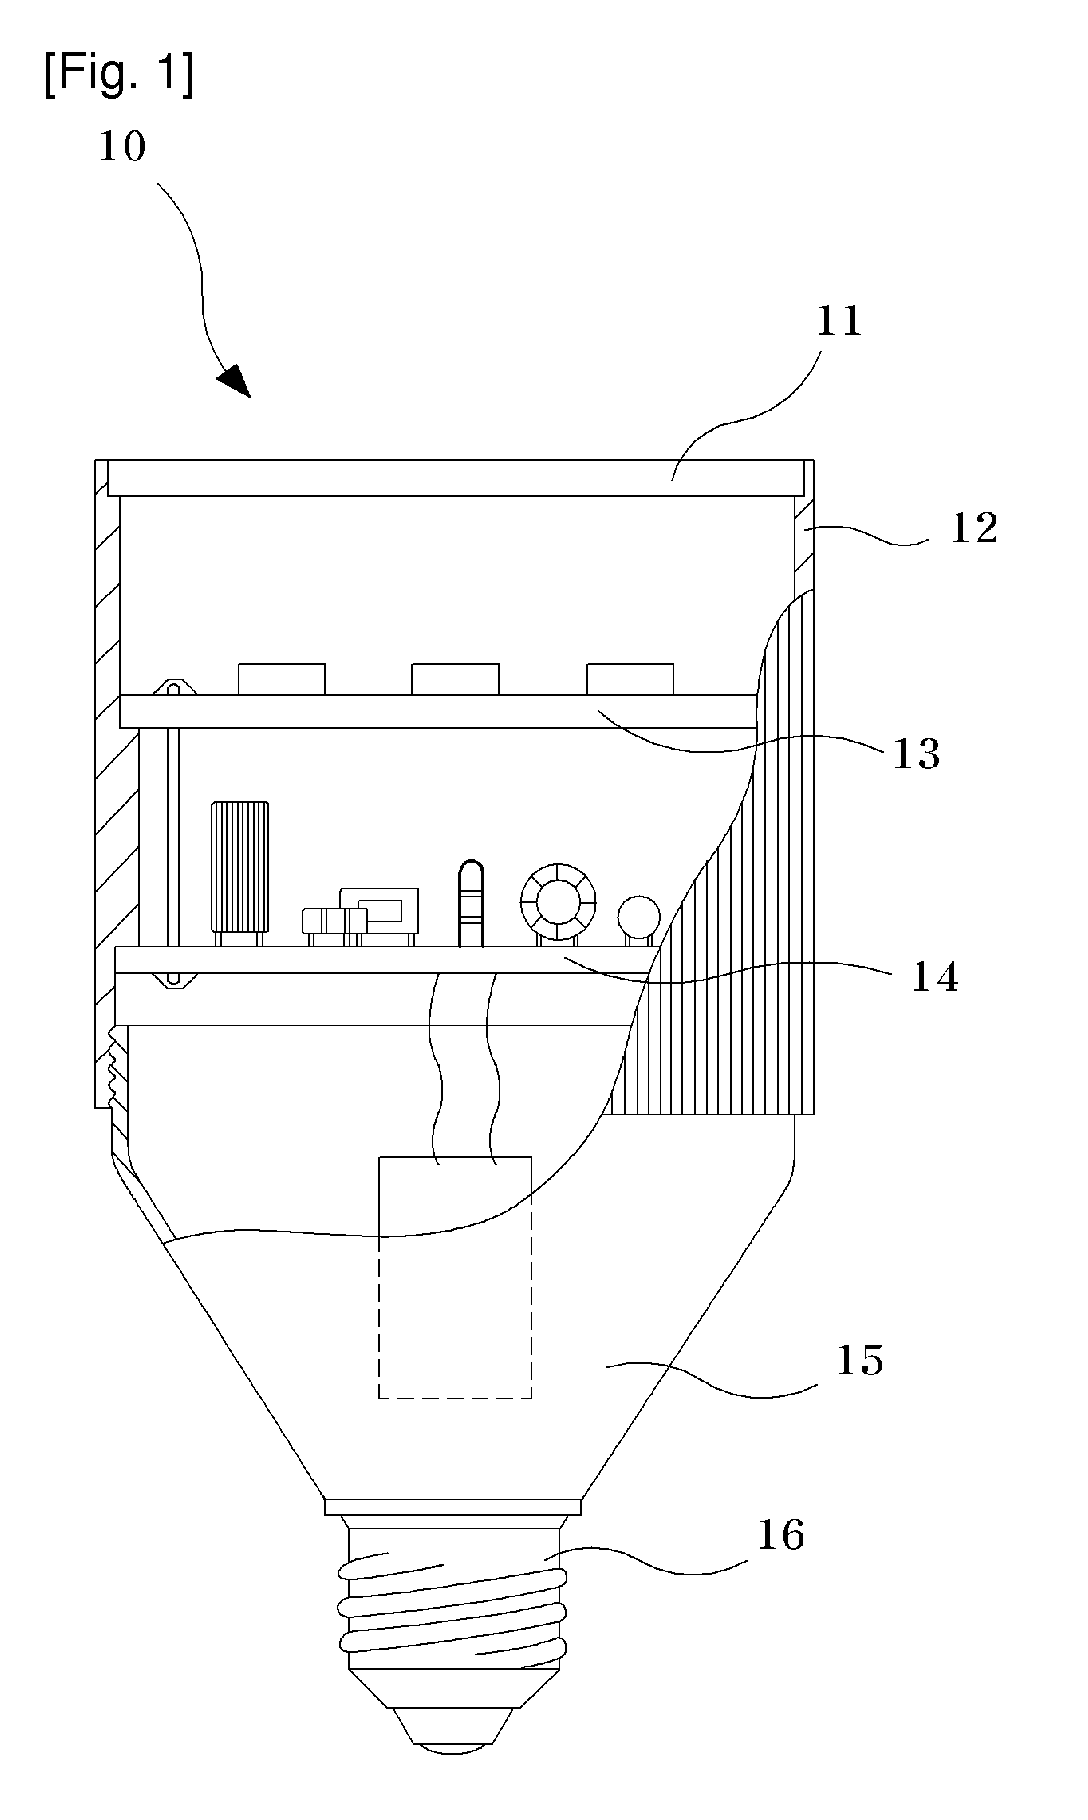 Bulbtype lamp with light emitting diodes using alternating current